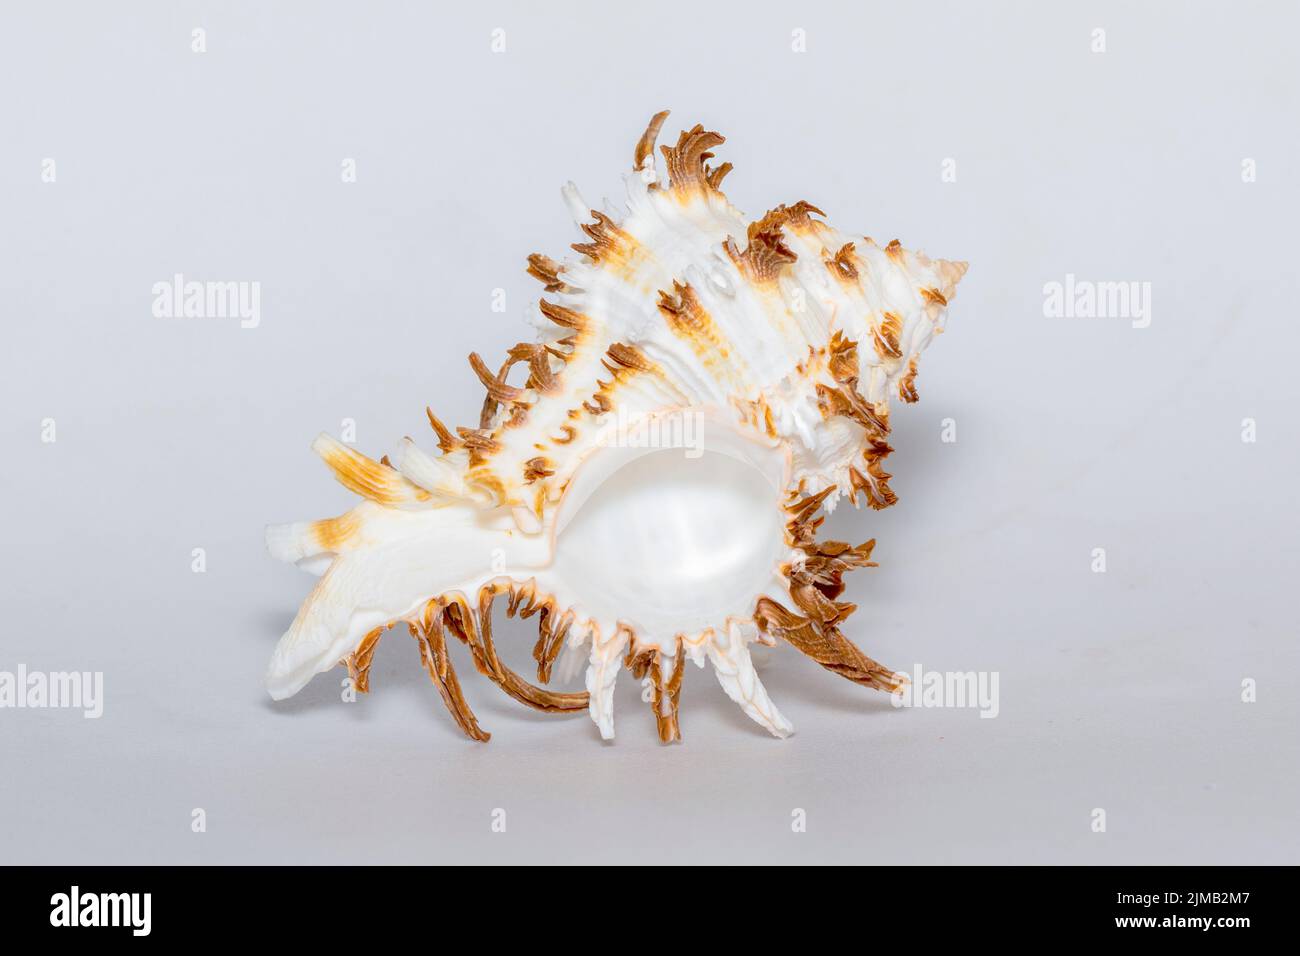 Image of chicoreus ramosus seashell common name the ramose murex or branched murex on a white background. Sea shells. Undersea Animals. Stock Photo